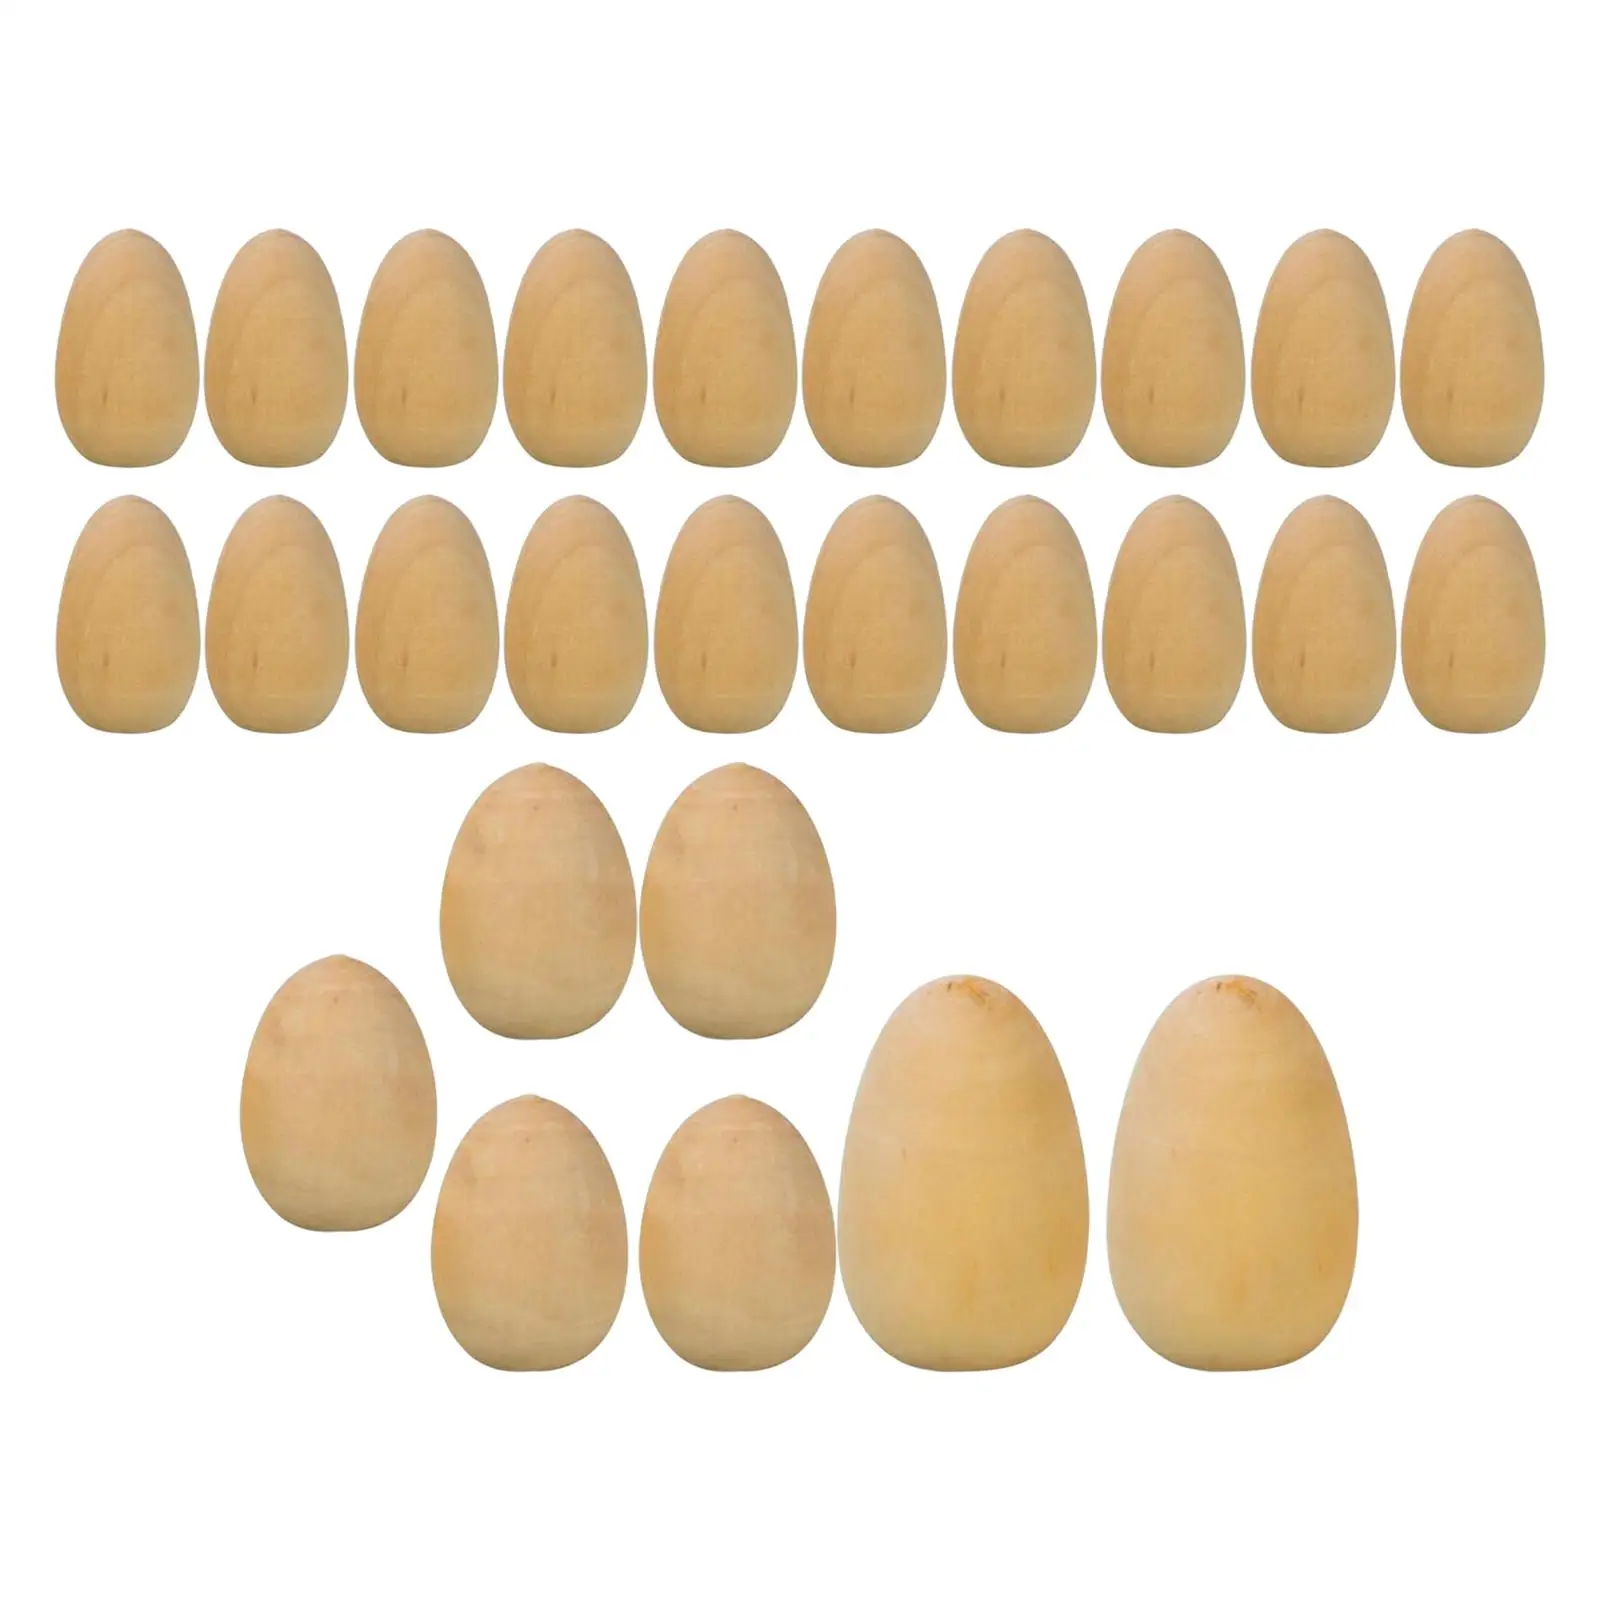 27Pcs Unfinished Wood Eggs with Flat Bottom Painted Exercise Manual Graffiti Wooden Blank Eggs for Basket Fillers